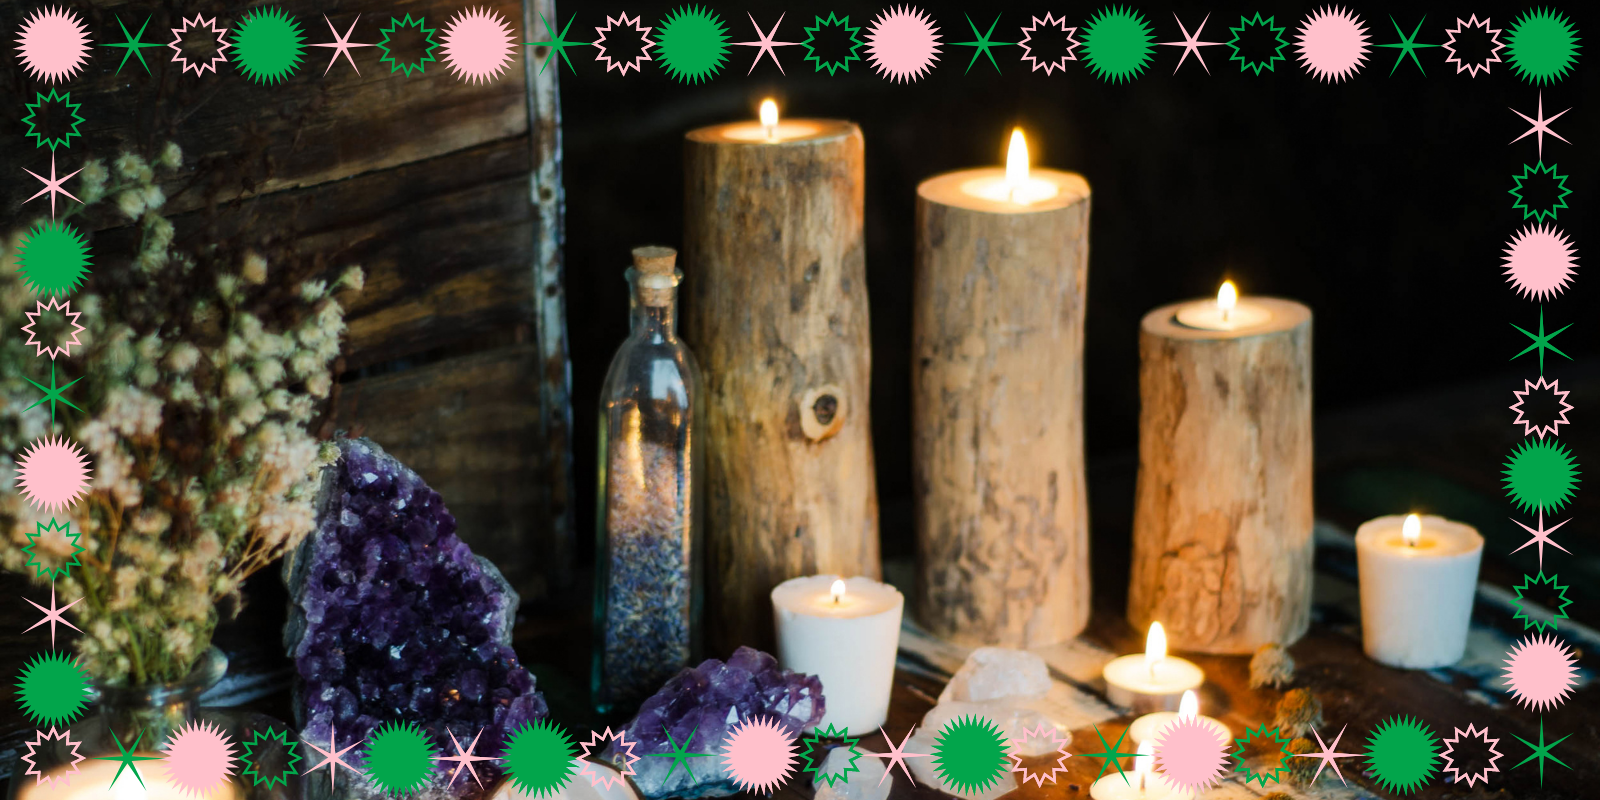 a robust altar with candles, crystals, and intentions for the new year